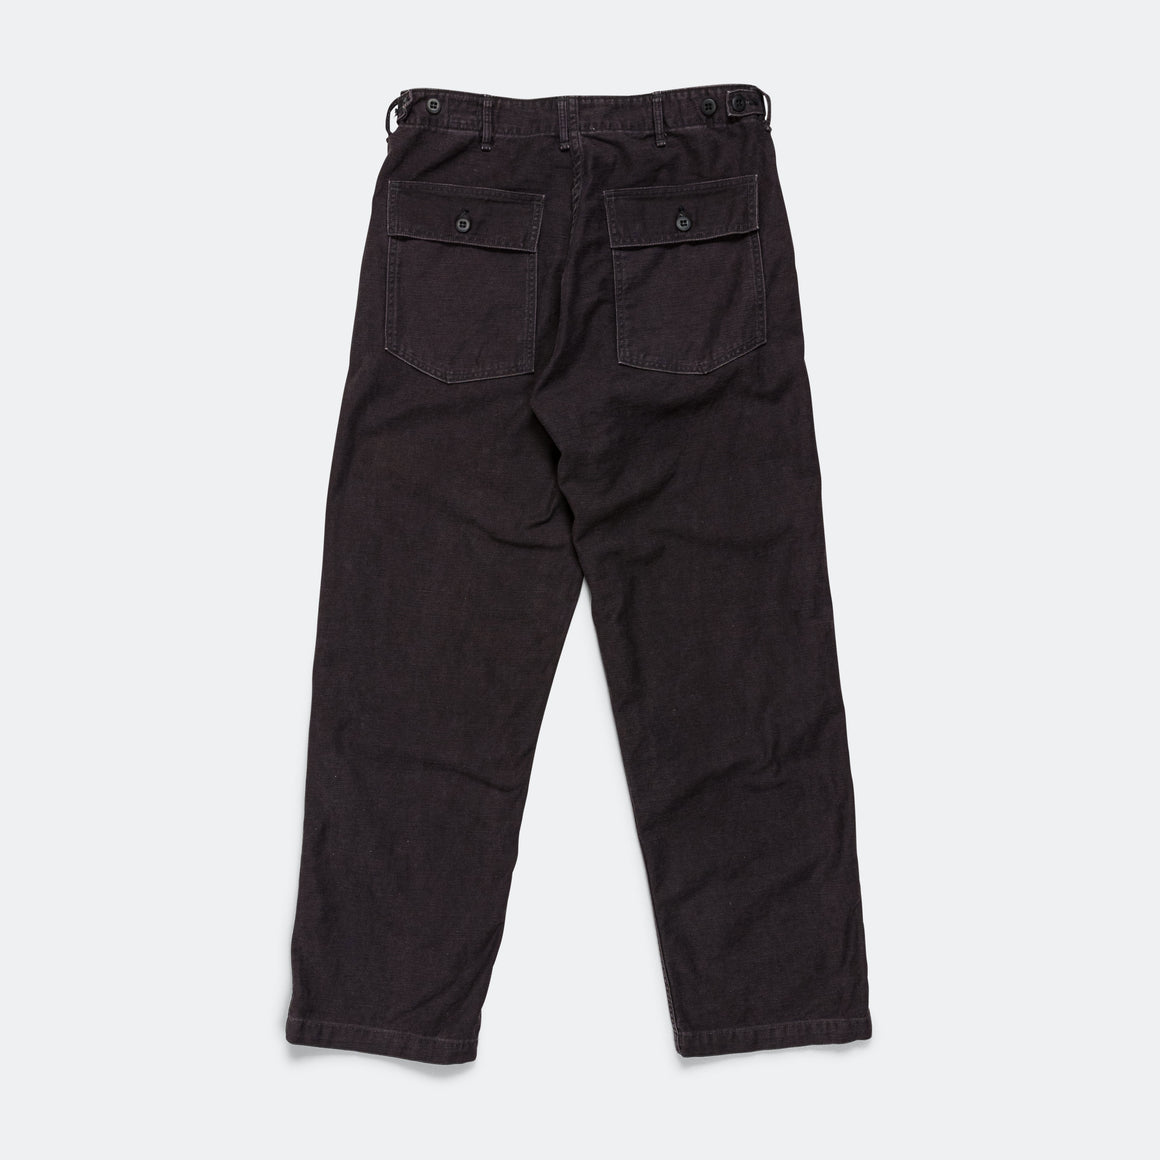 orSlow - US Army Fatigue Pants (Regular Fit) - Black - UP THERE